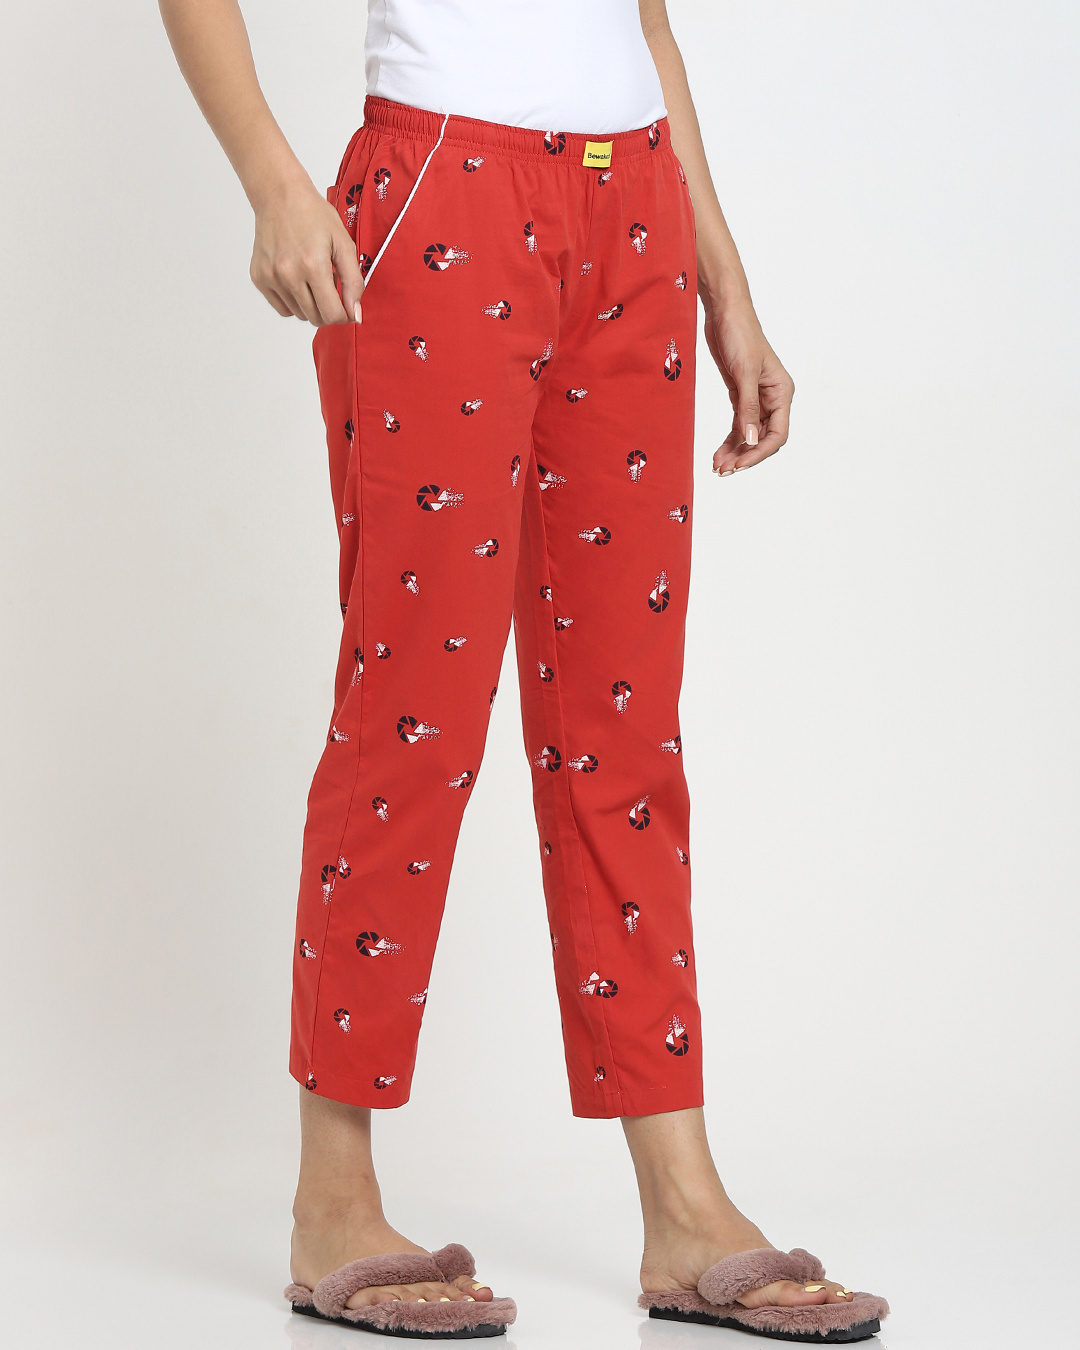 Shop Women's Red All Over Geometric Printed Pyjamas-Back